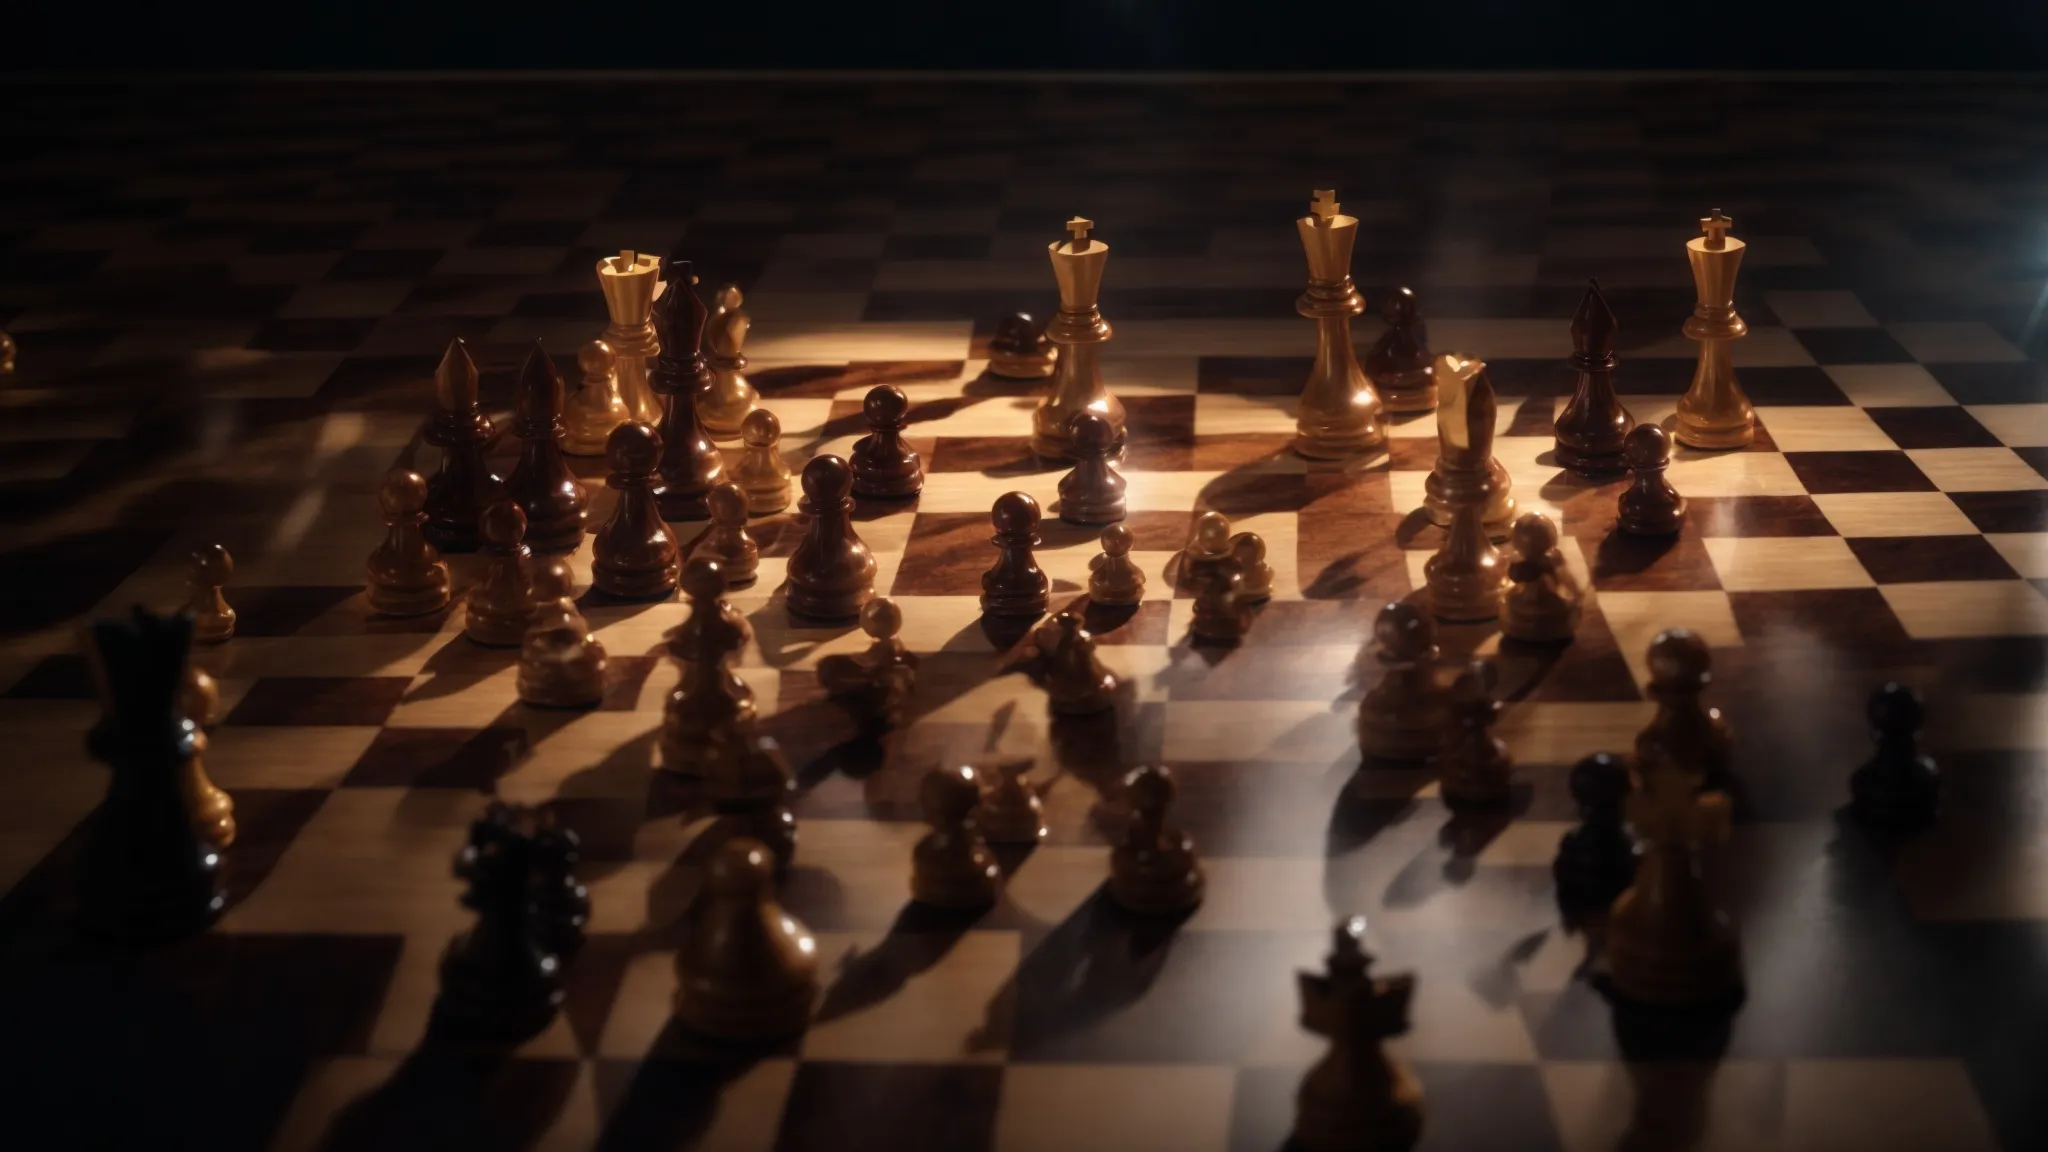 a chessboard under a spotlight, with distinct pieces positioned as if strategizing.